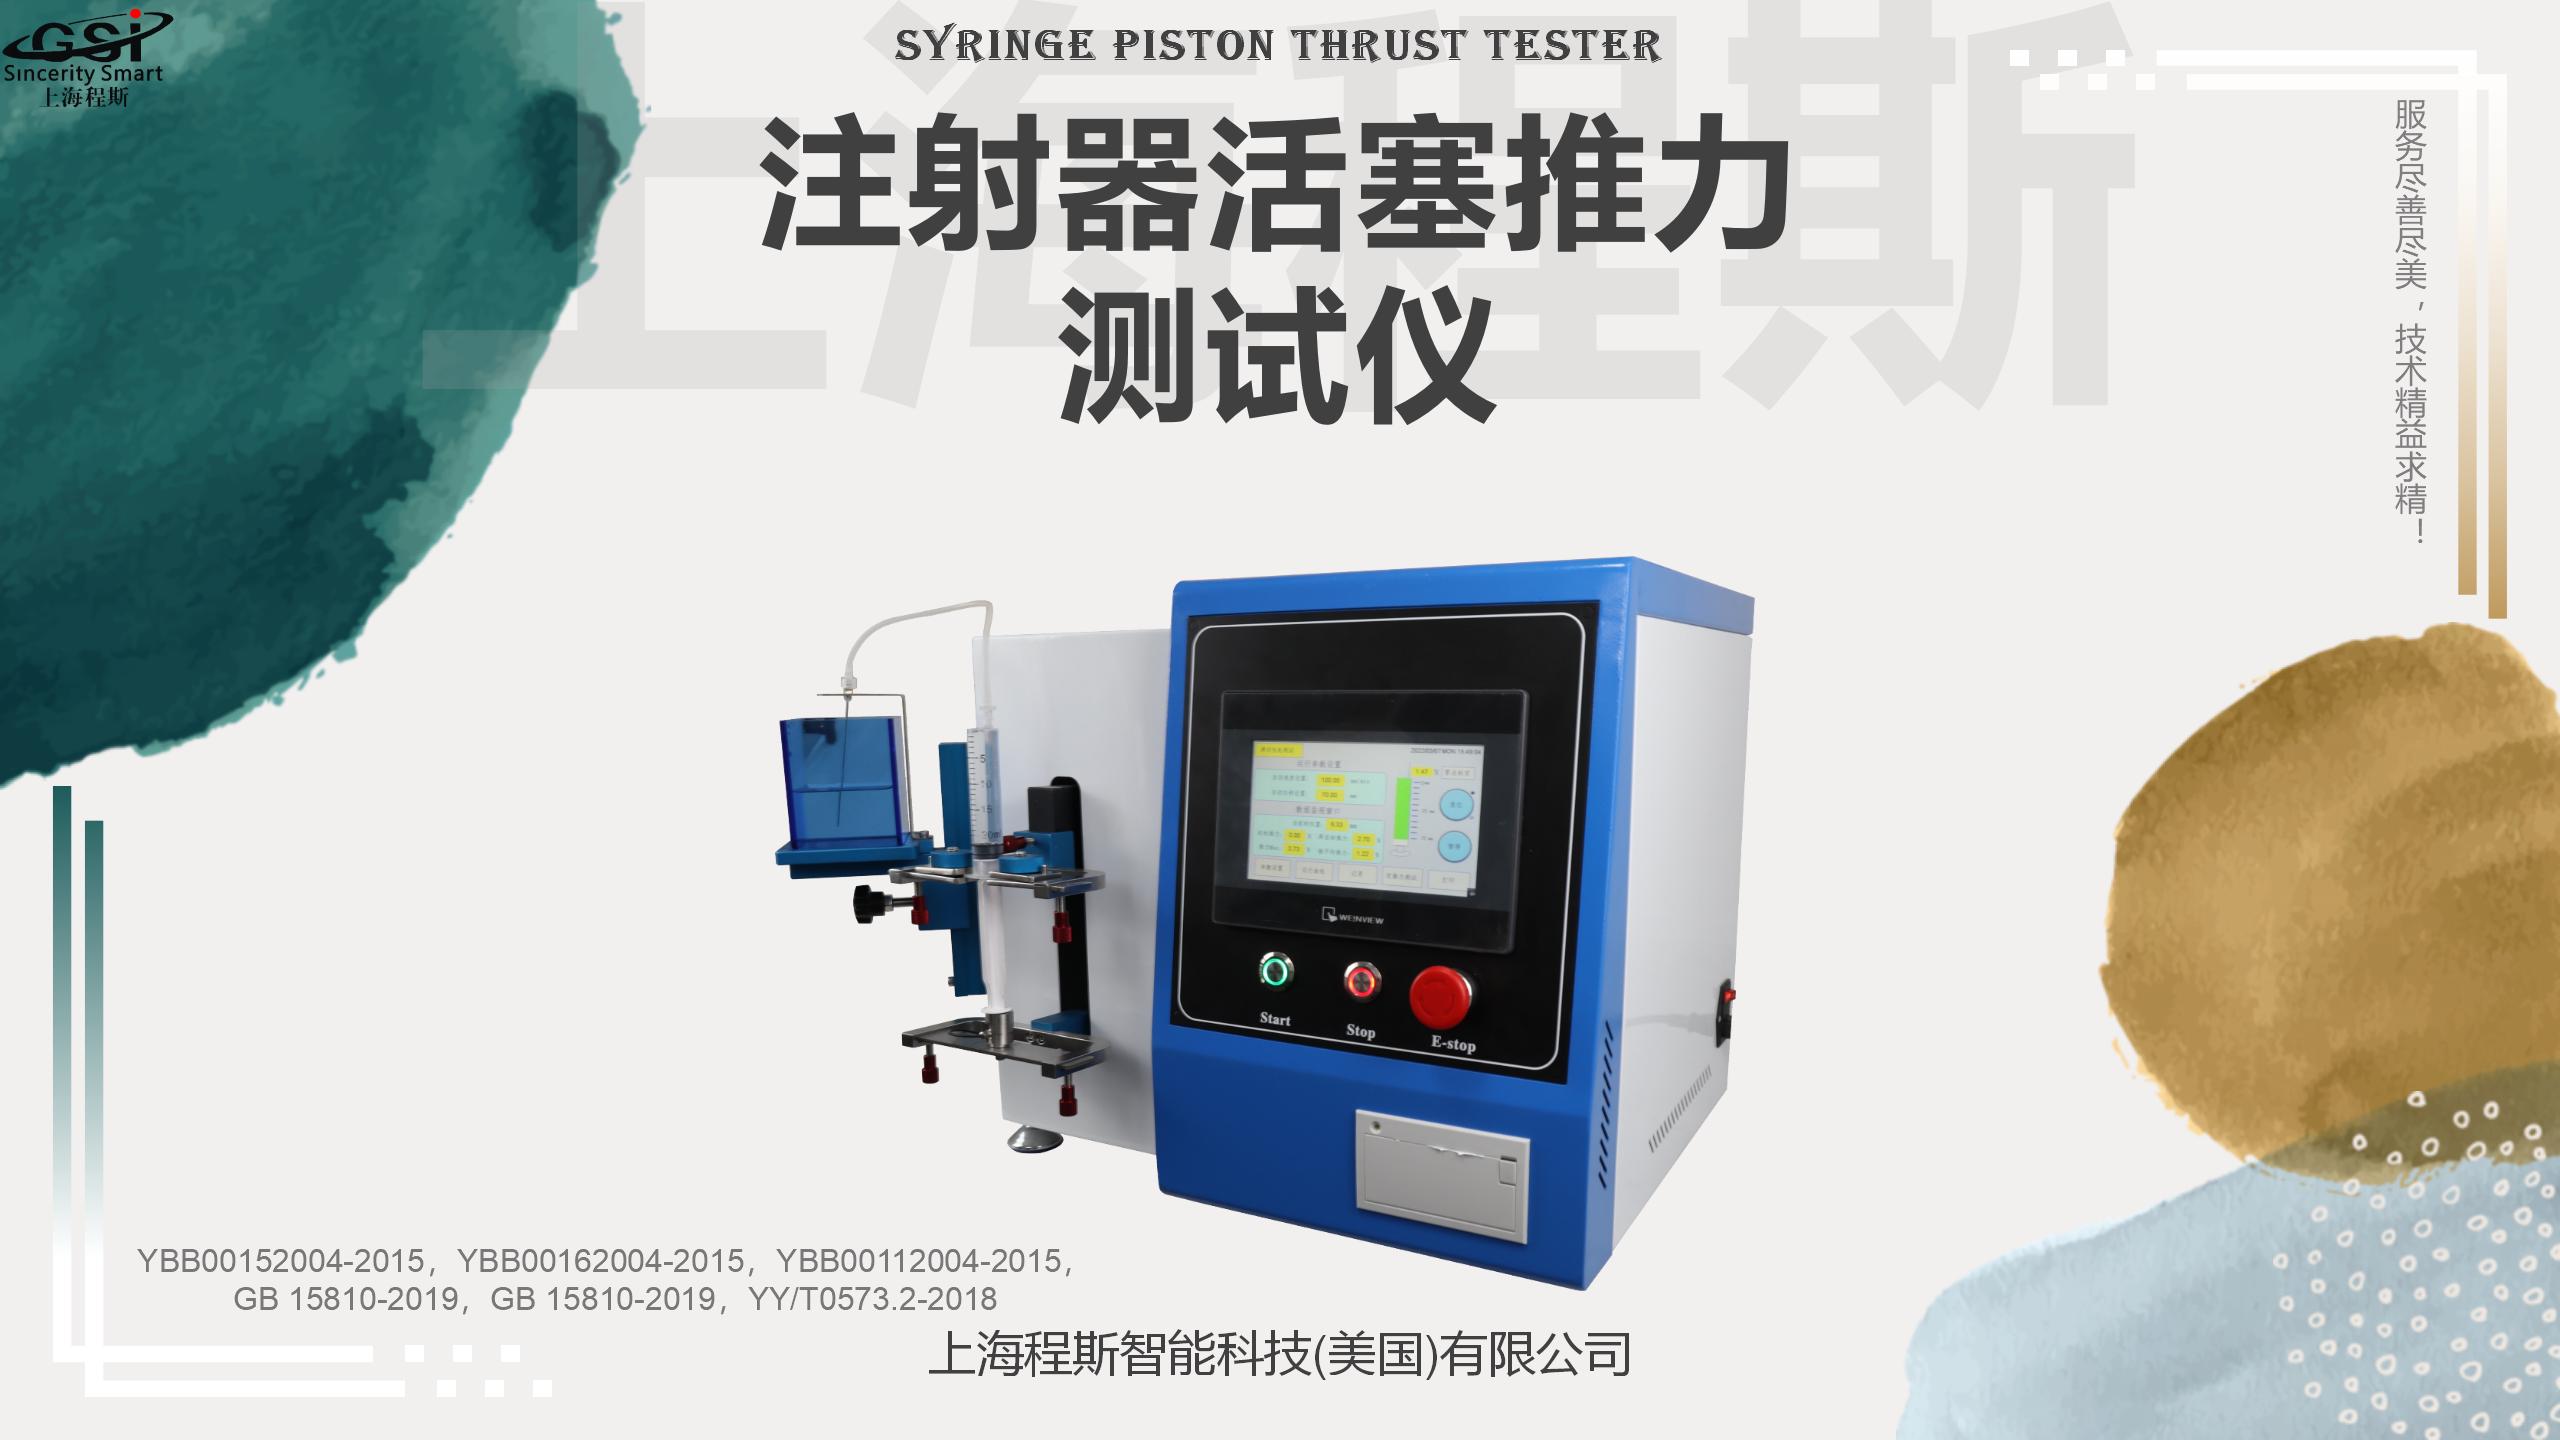 Sufficient supply of CSI-Z021T selected products for injector piston thrust tester